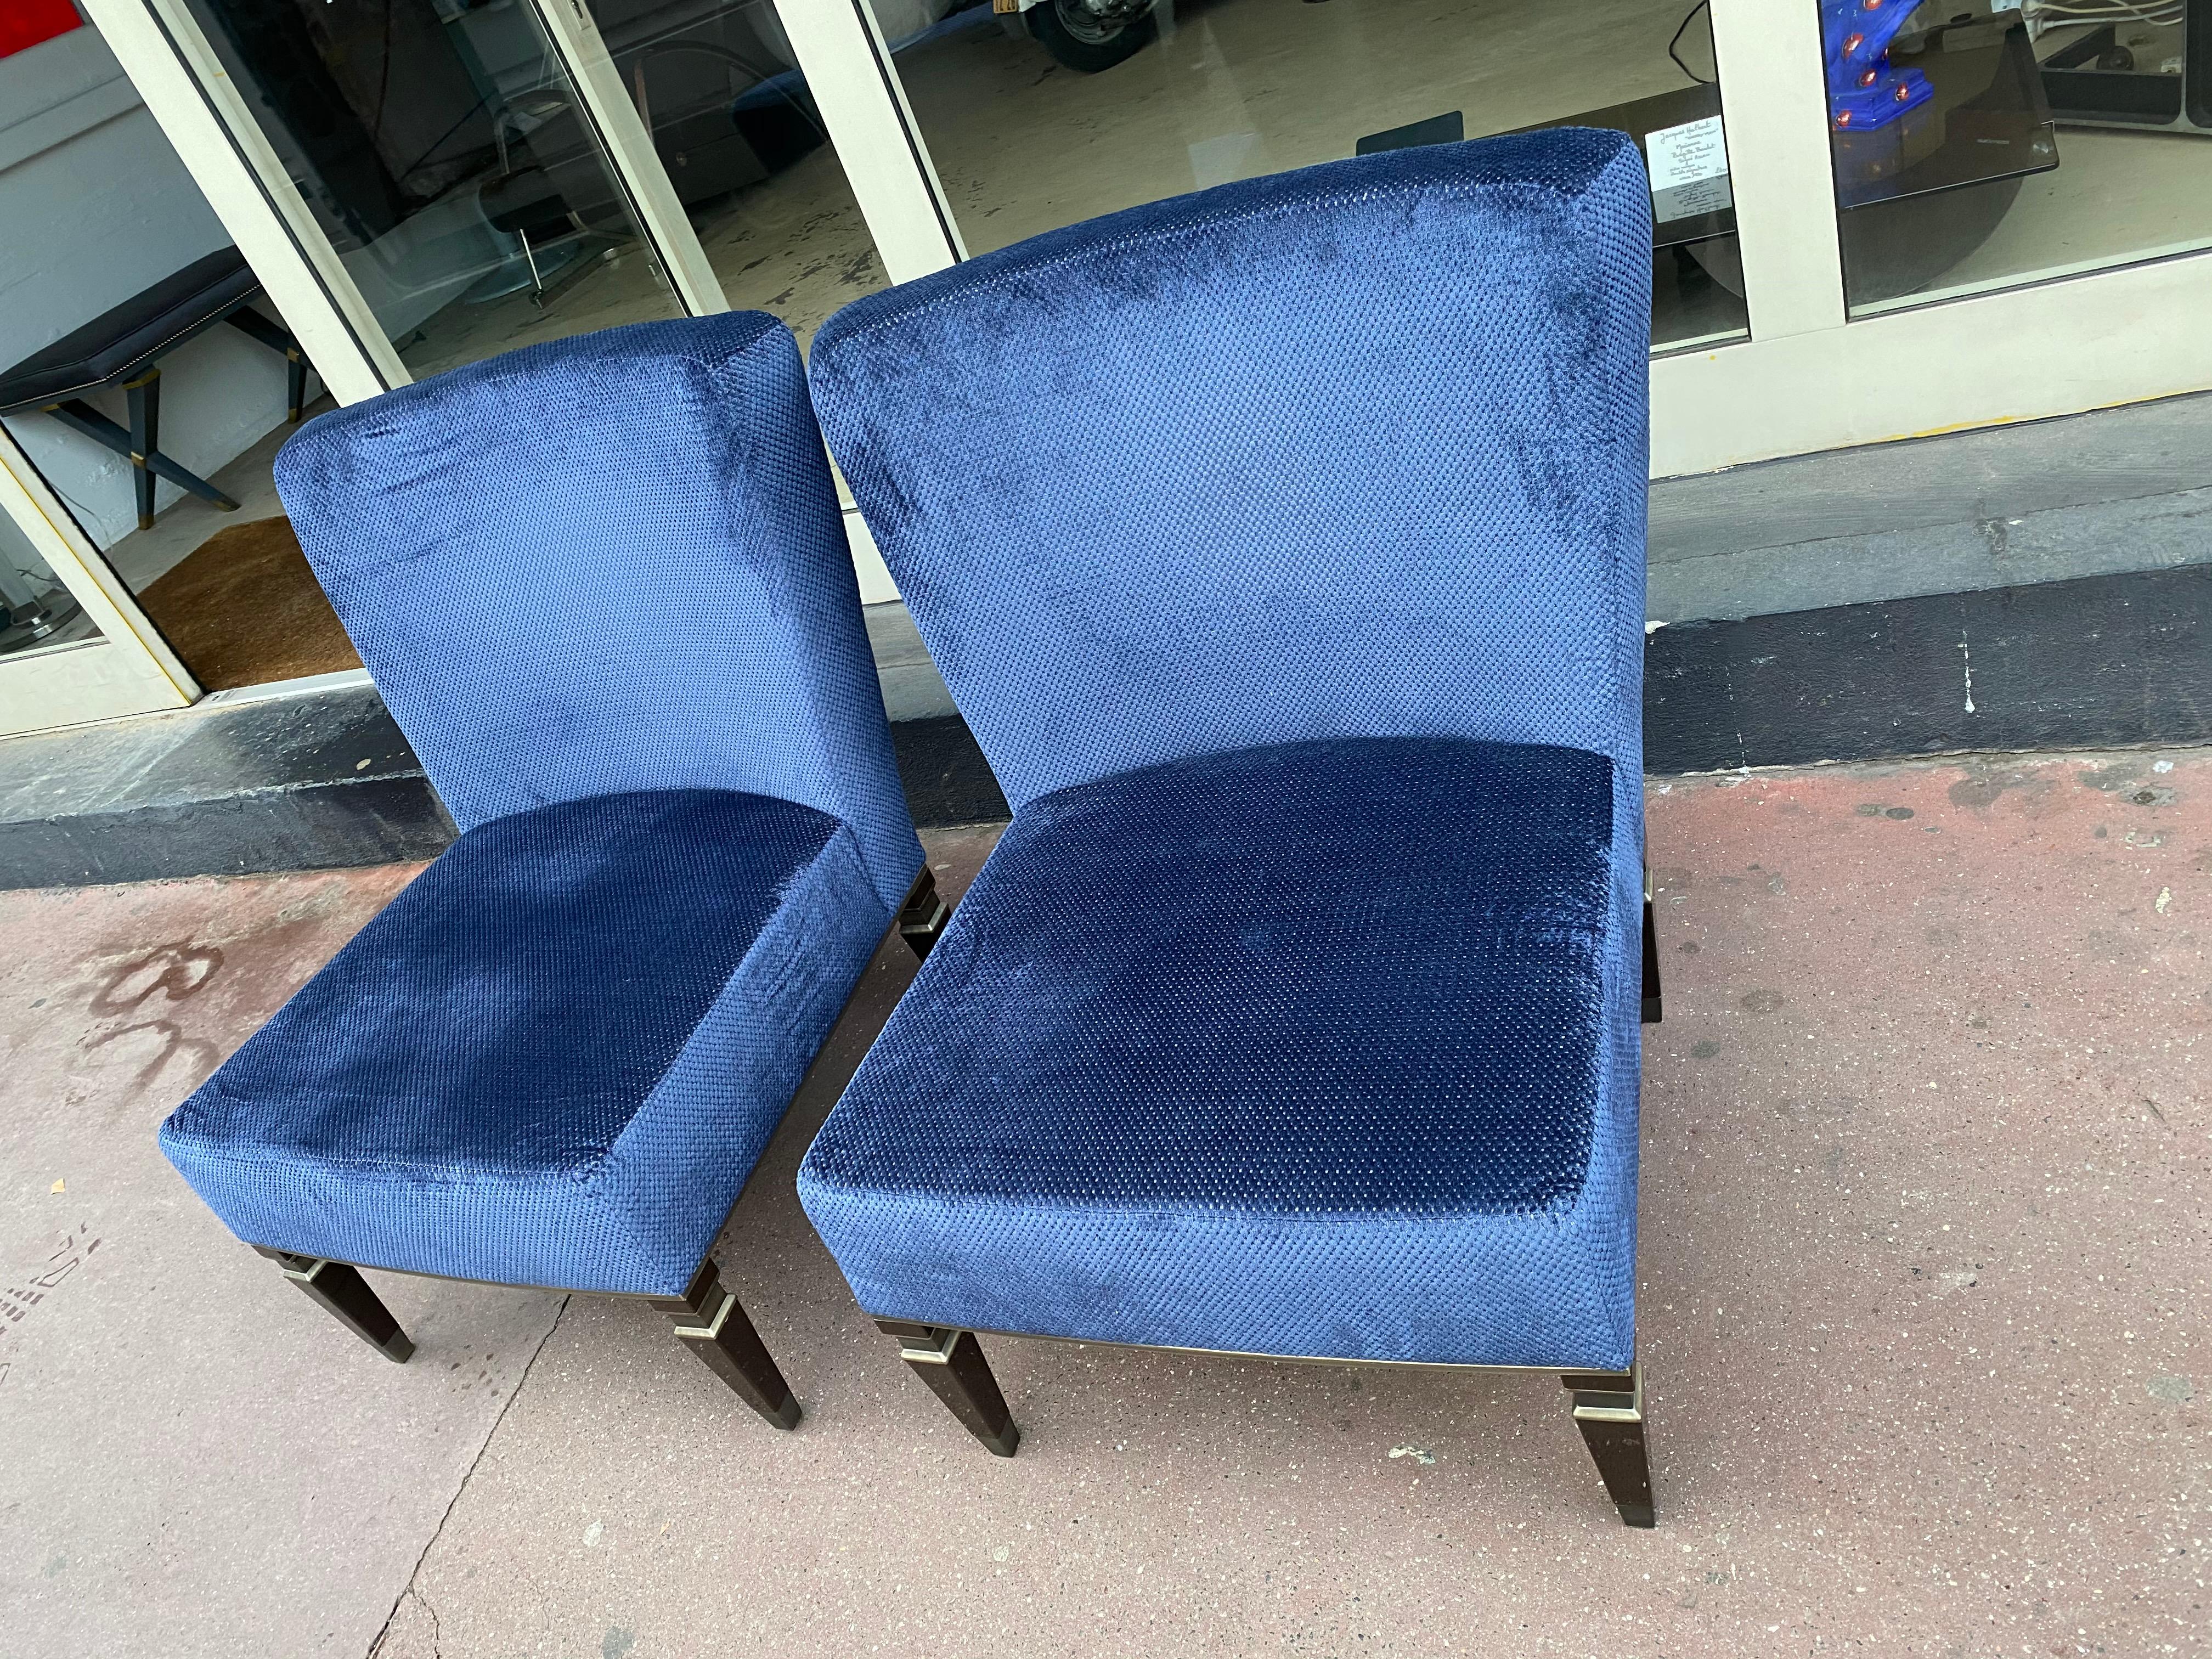 Pair of armchairs 
Heritage, 2020
Luxury armchairs
Blue velvet / wood / metal
Signed at the back of the chairs
New 
Measures: 73 W x 62 D x 86 H cm 
Seat 43 cm.